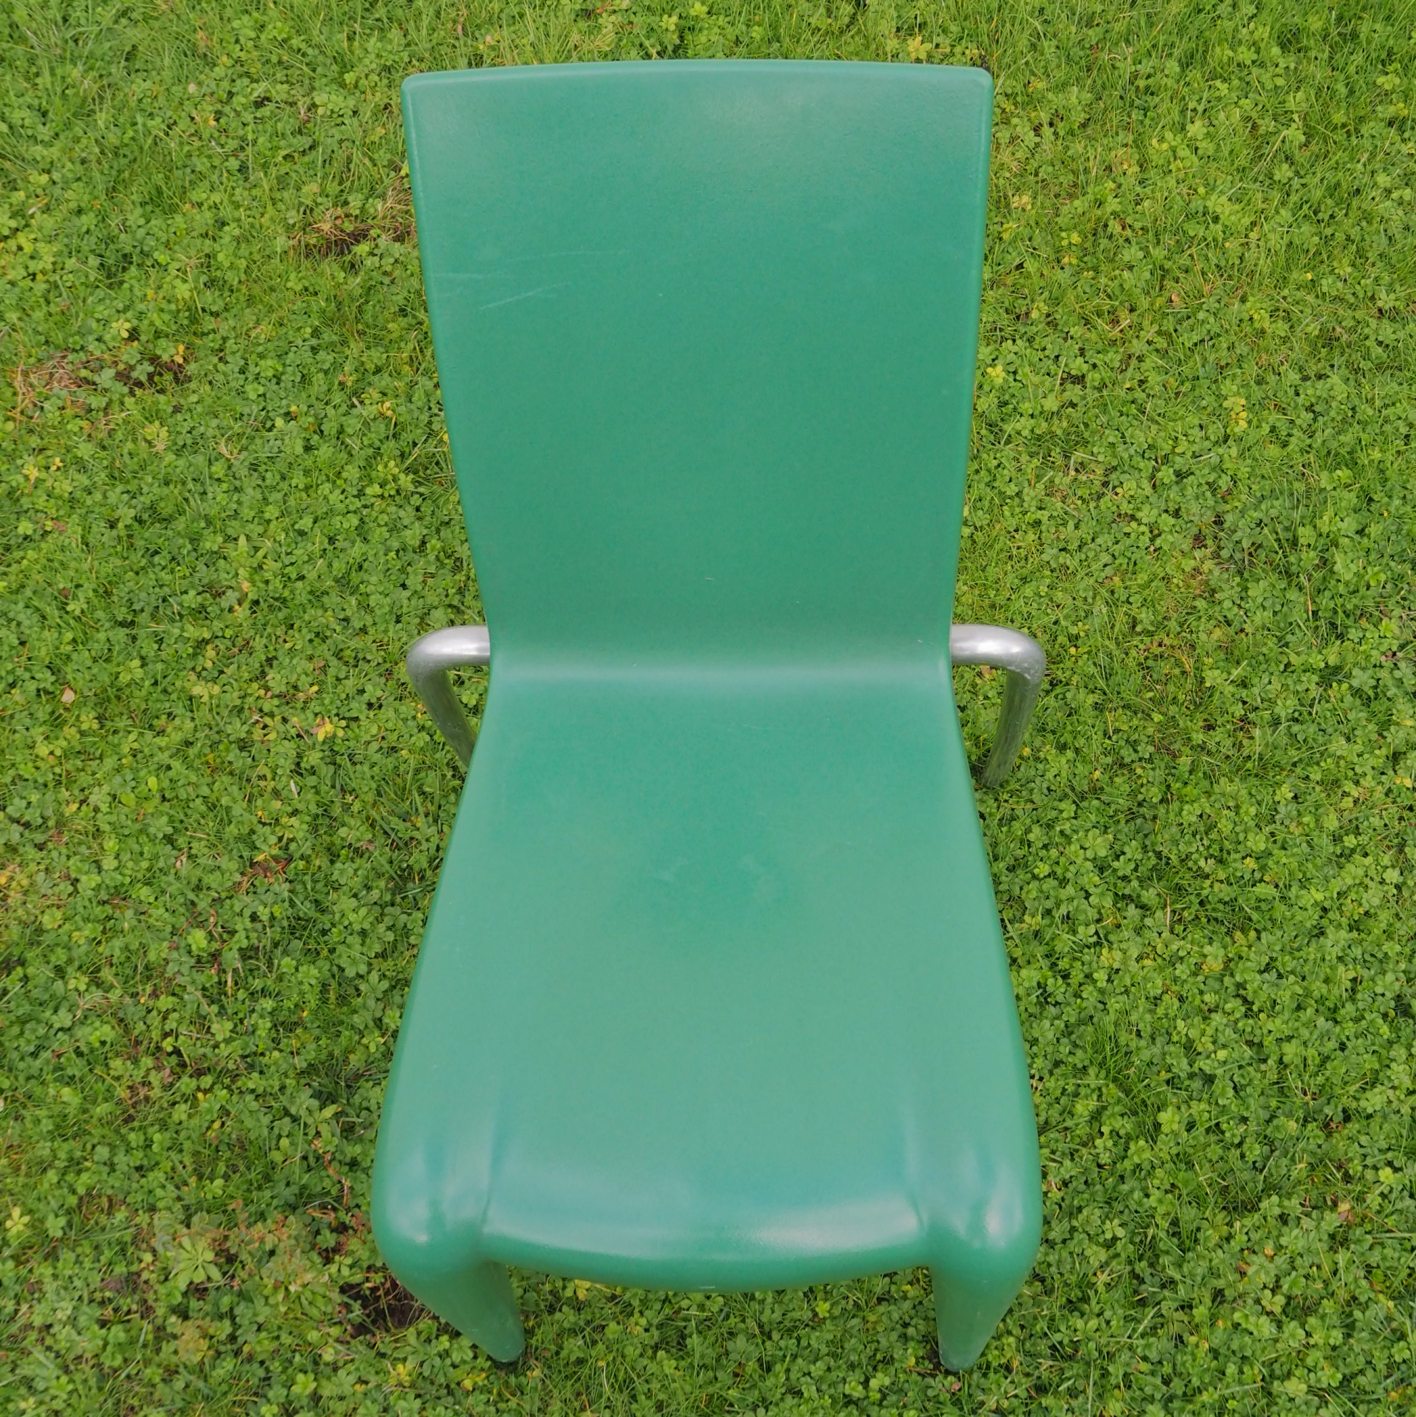 Chair 'Louis 20' by Starck for Vitra (ca. 1990)